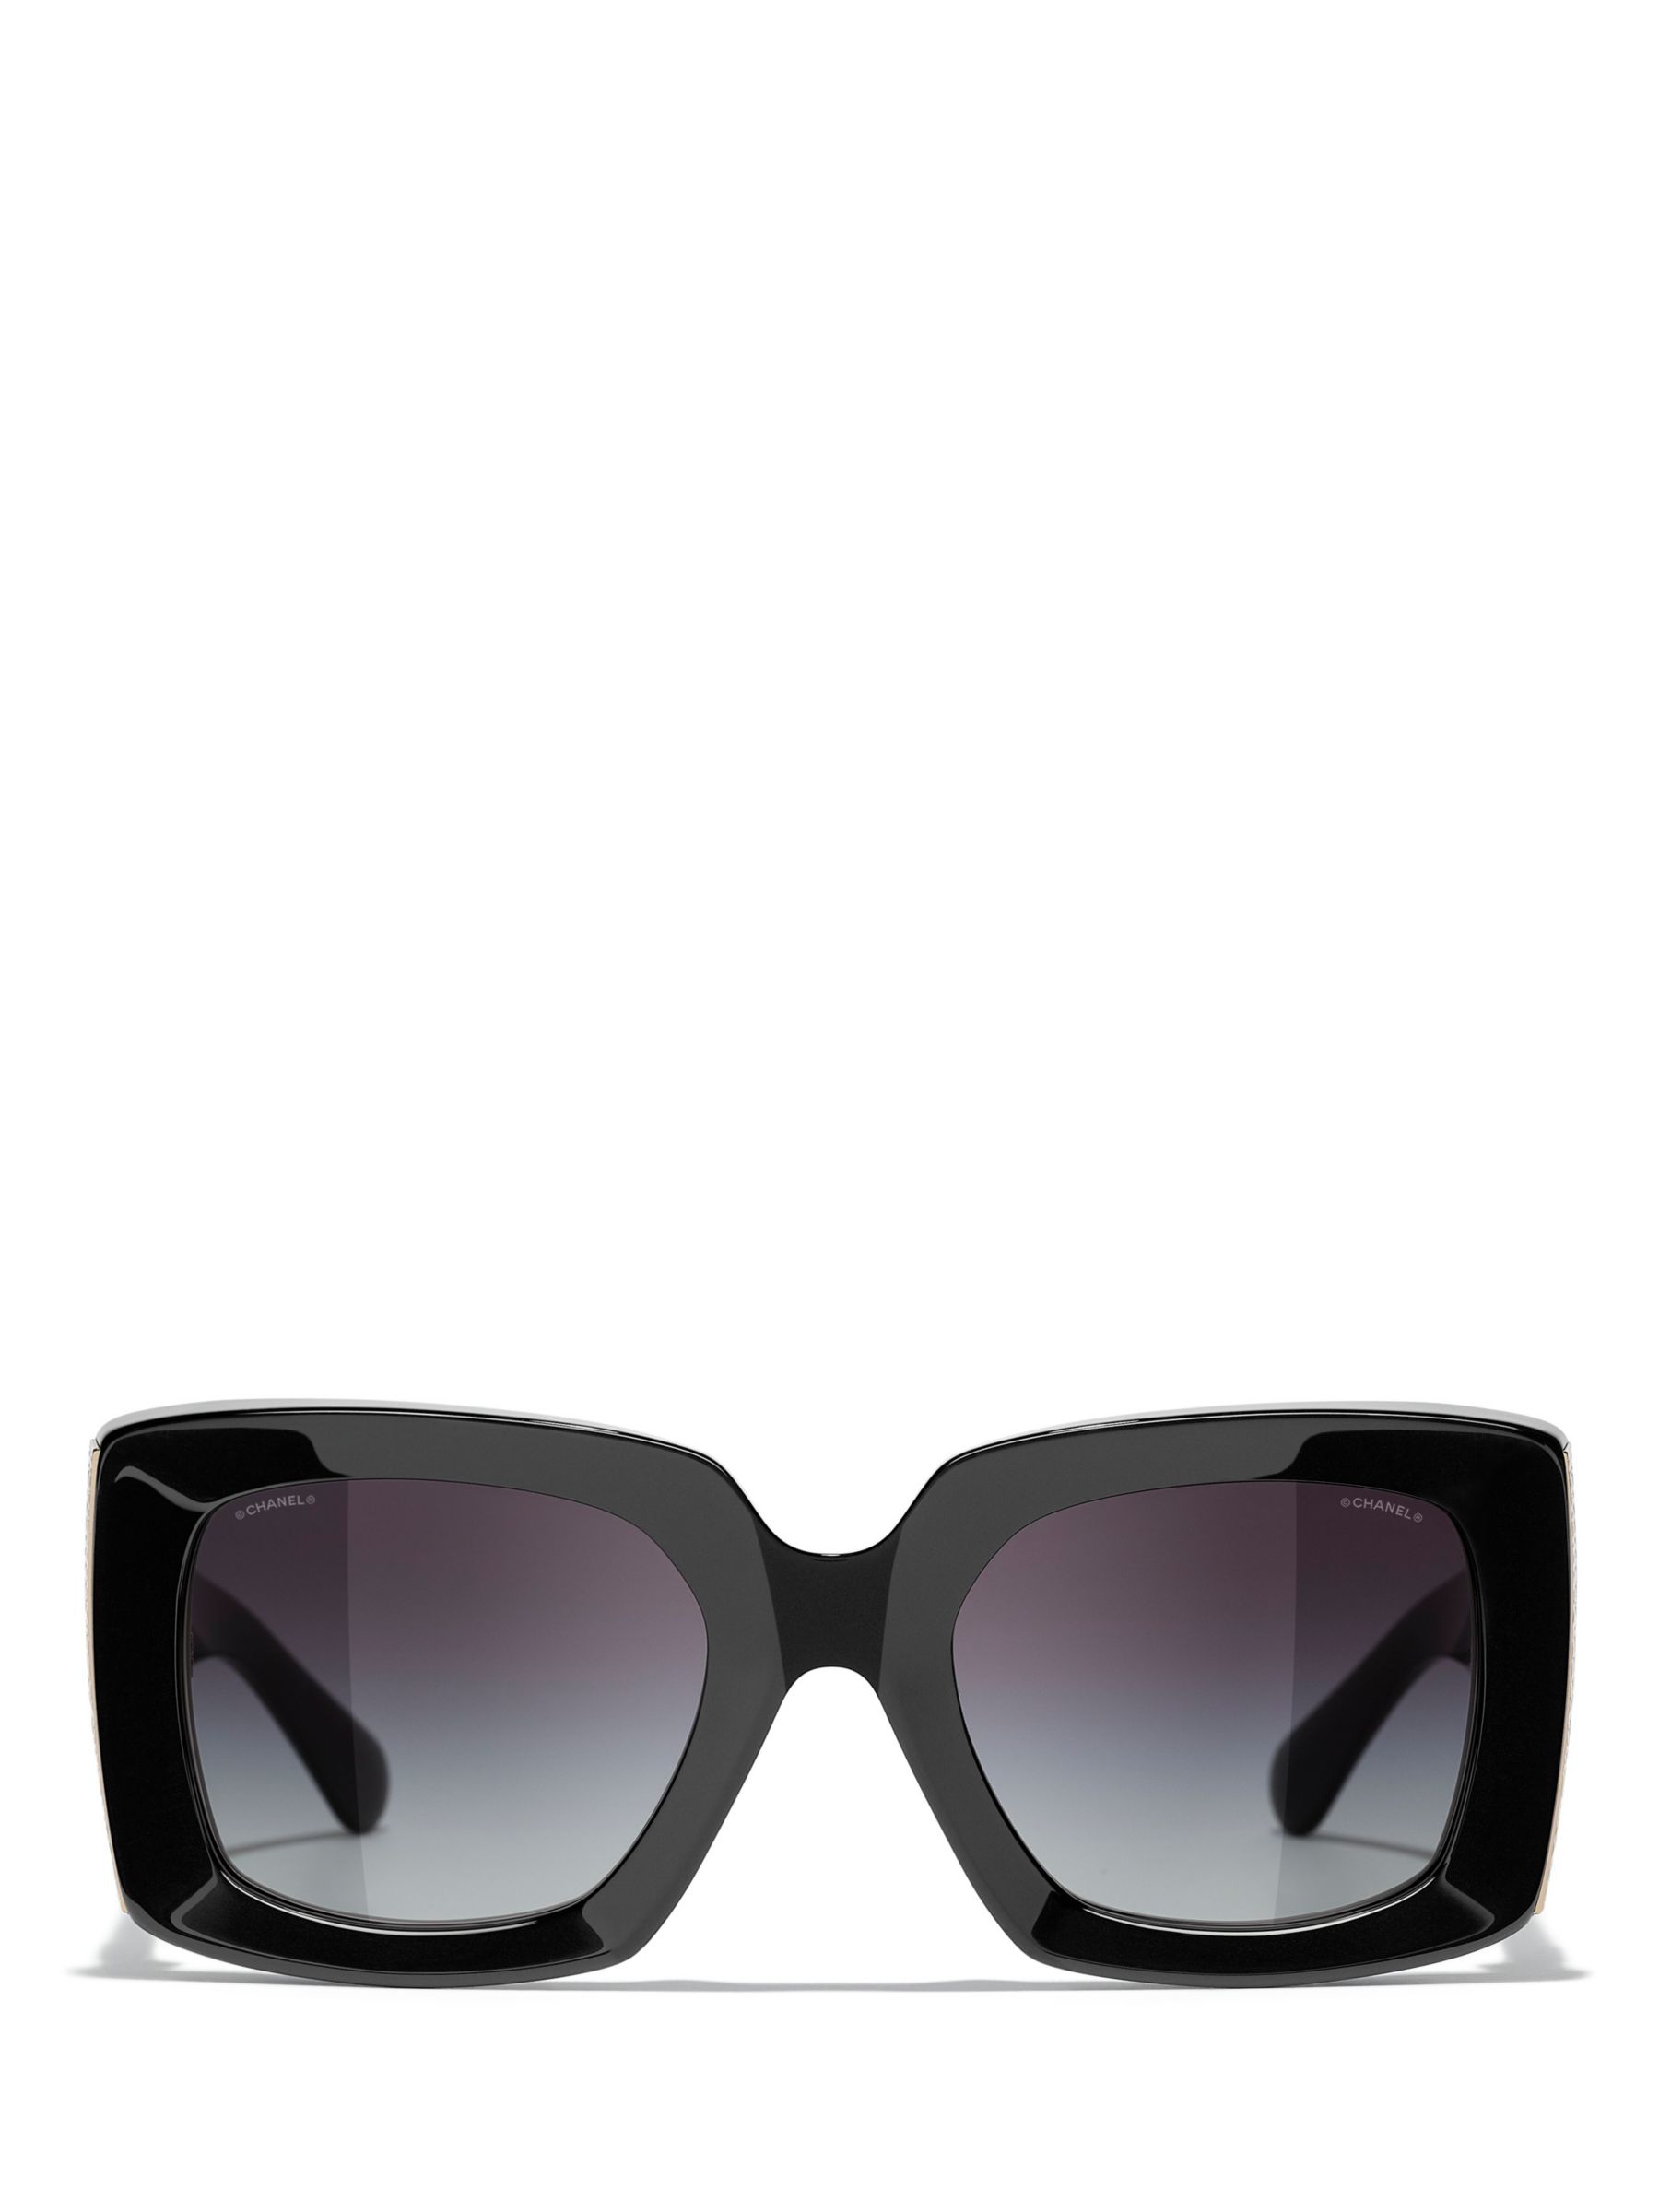 CHANEL Oval Sunglasses CH5414 Black/Beige at John Lewis & Partners